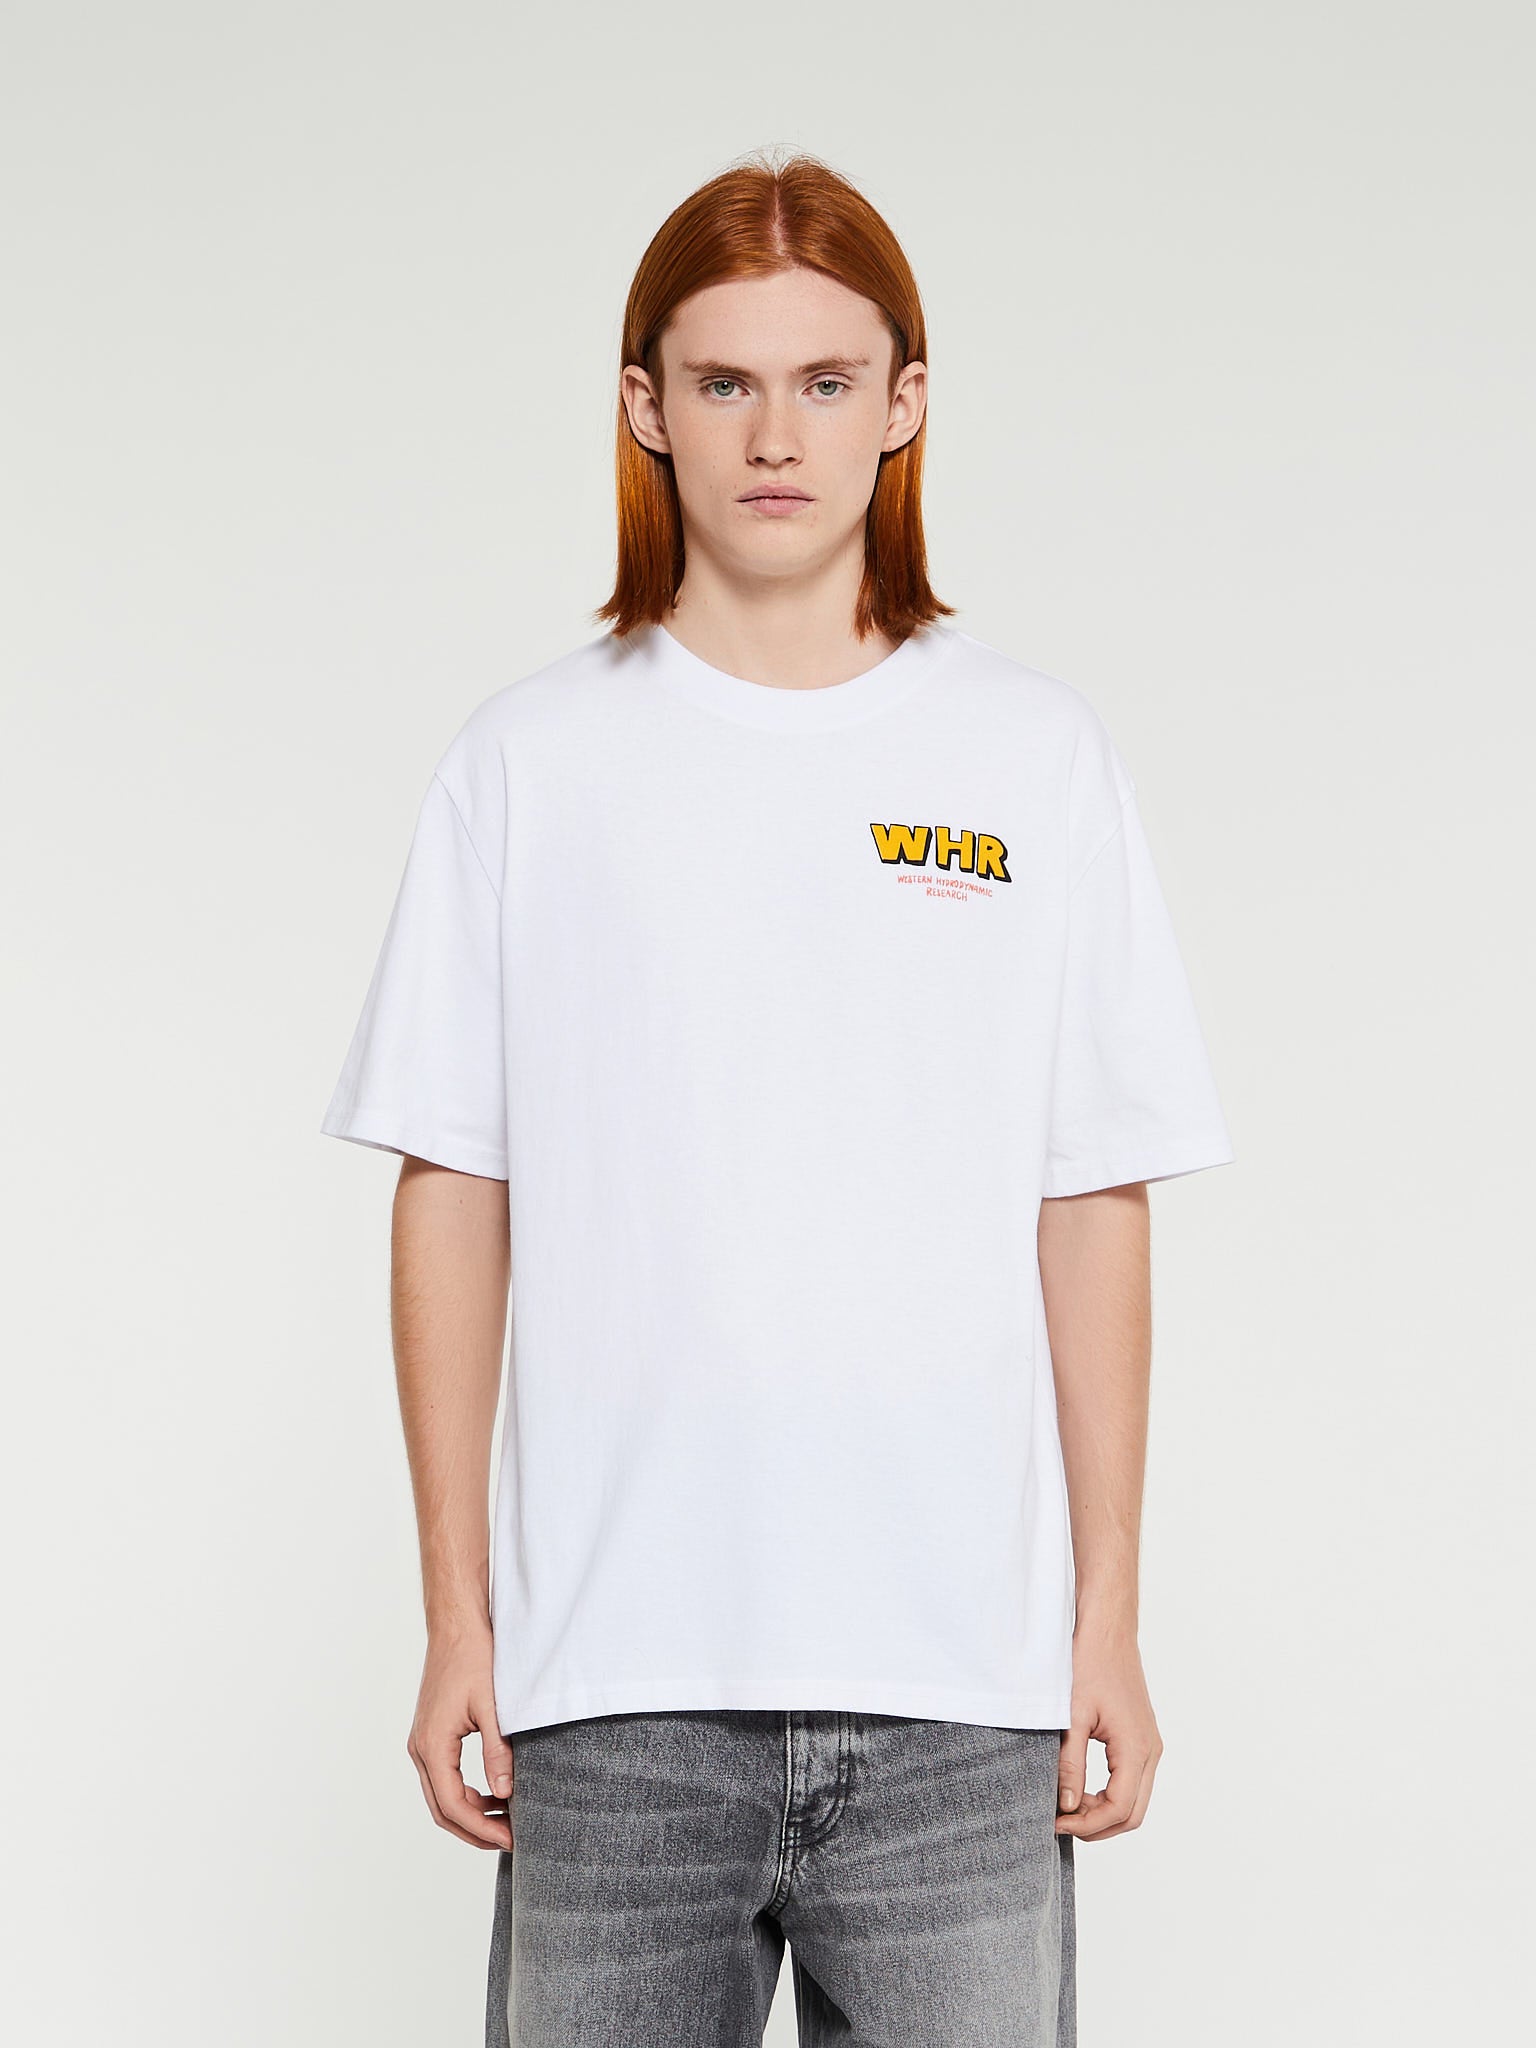 Western Hydrodynamic Research - Wobbly Worker Tee in White